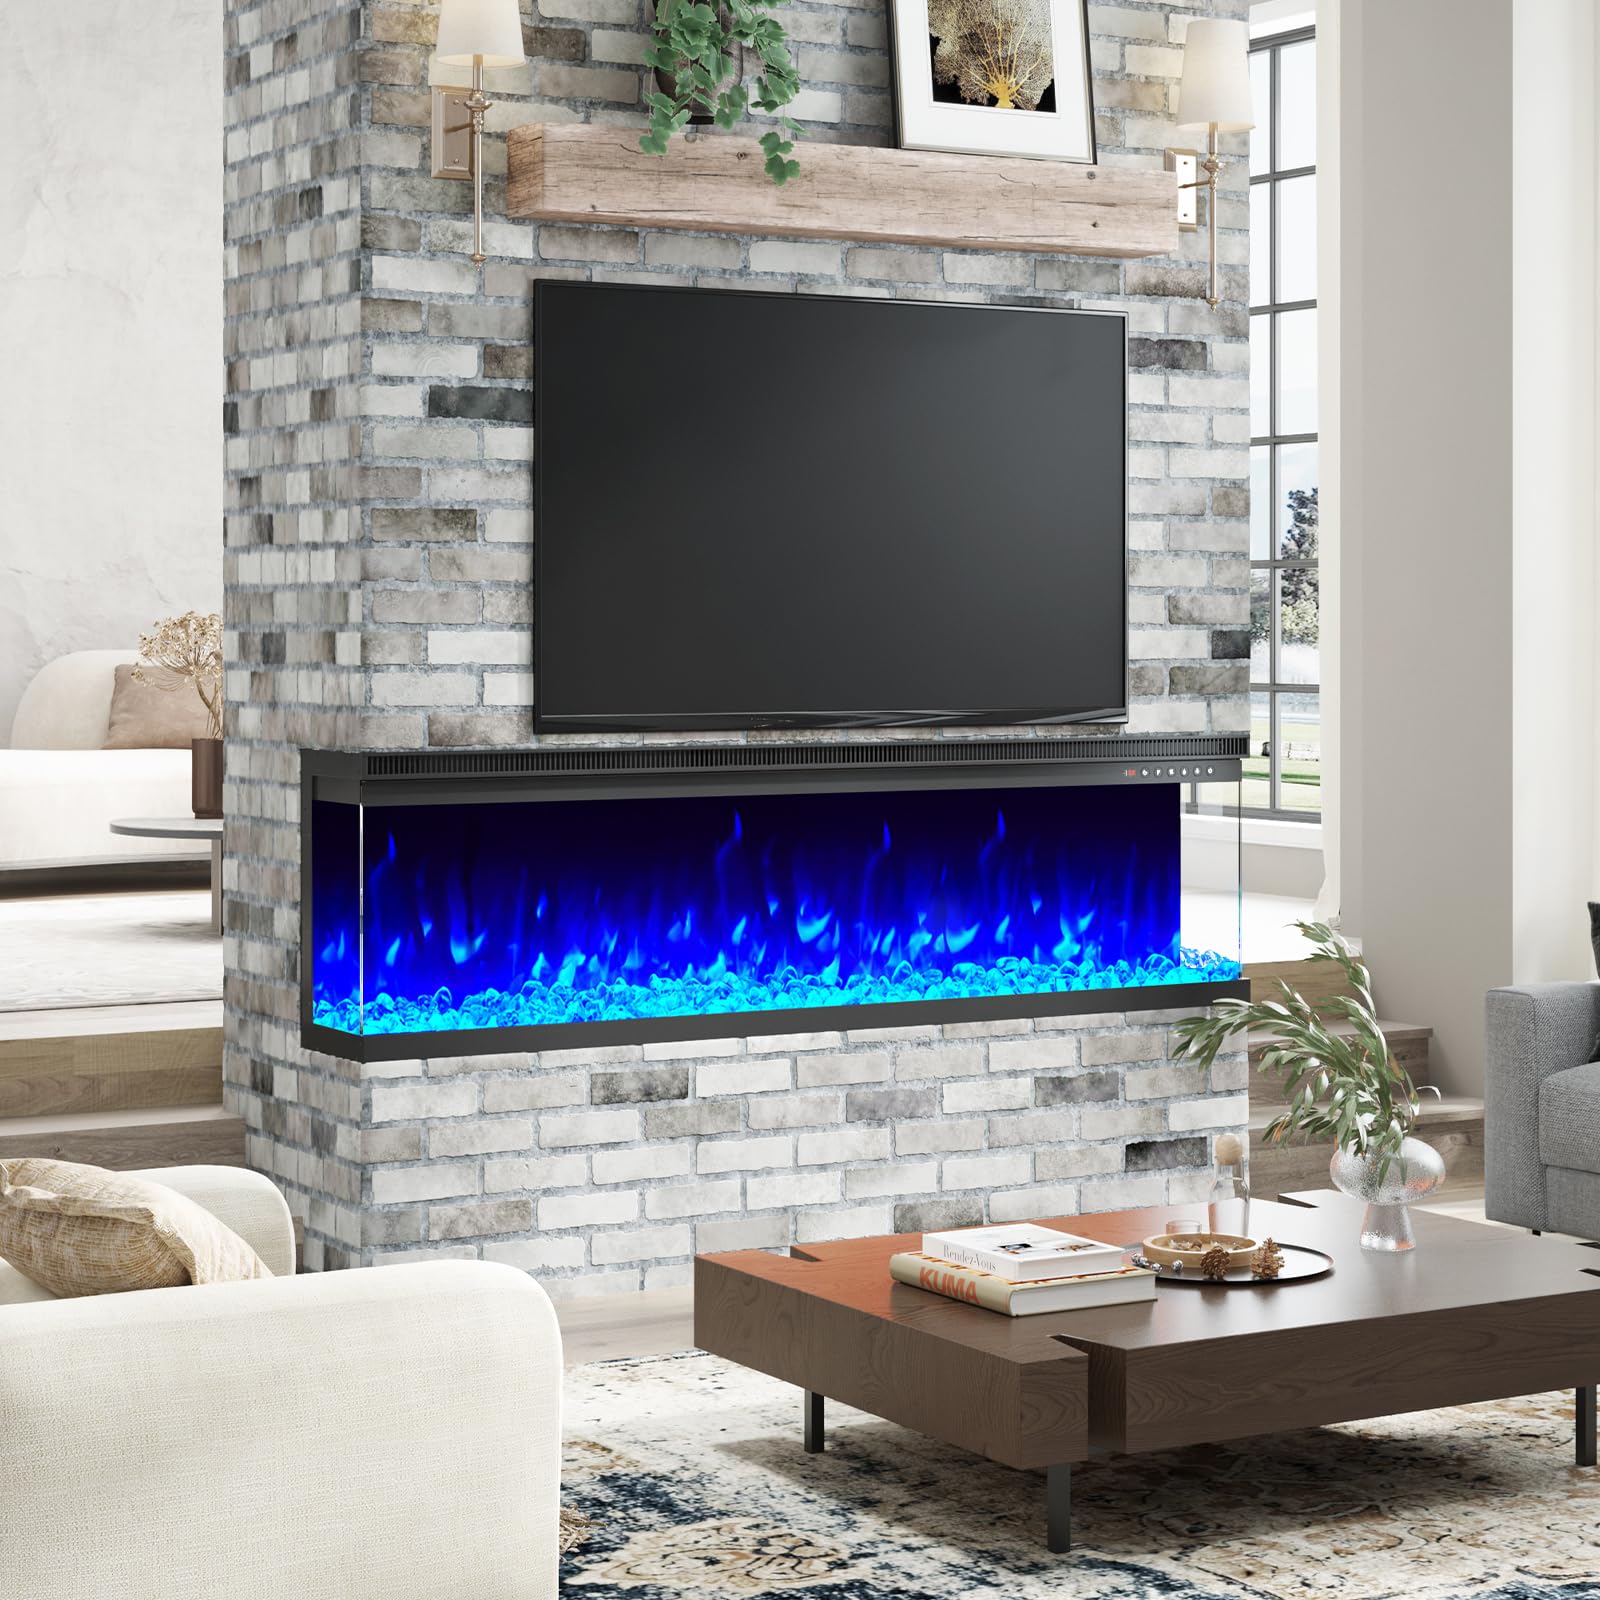 LUXOAK 60" 3 Sided Electric Fireplace of Tempered Glass Panels & Log and Crystal, Fireplace Heater with 9 Flame Colors & 5 Brightness Levels & 2 Power Modes, Noisy Free, Recessed, Black